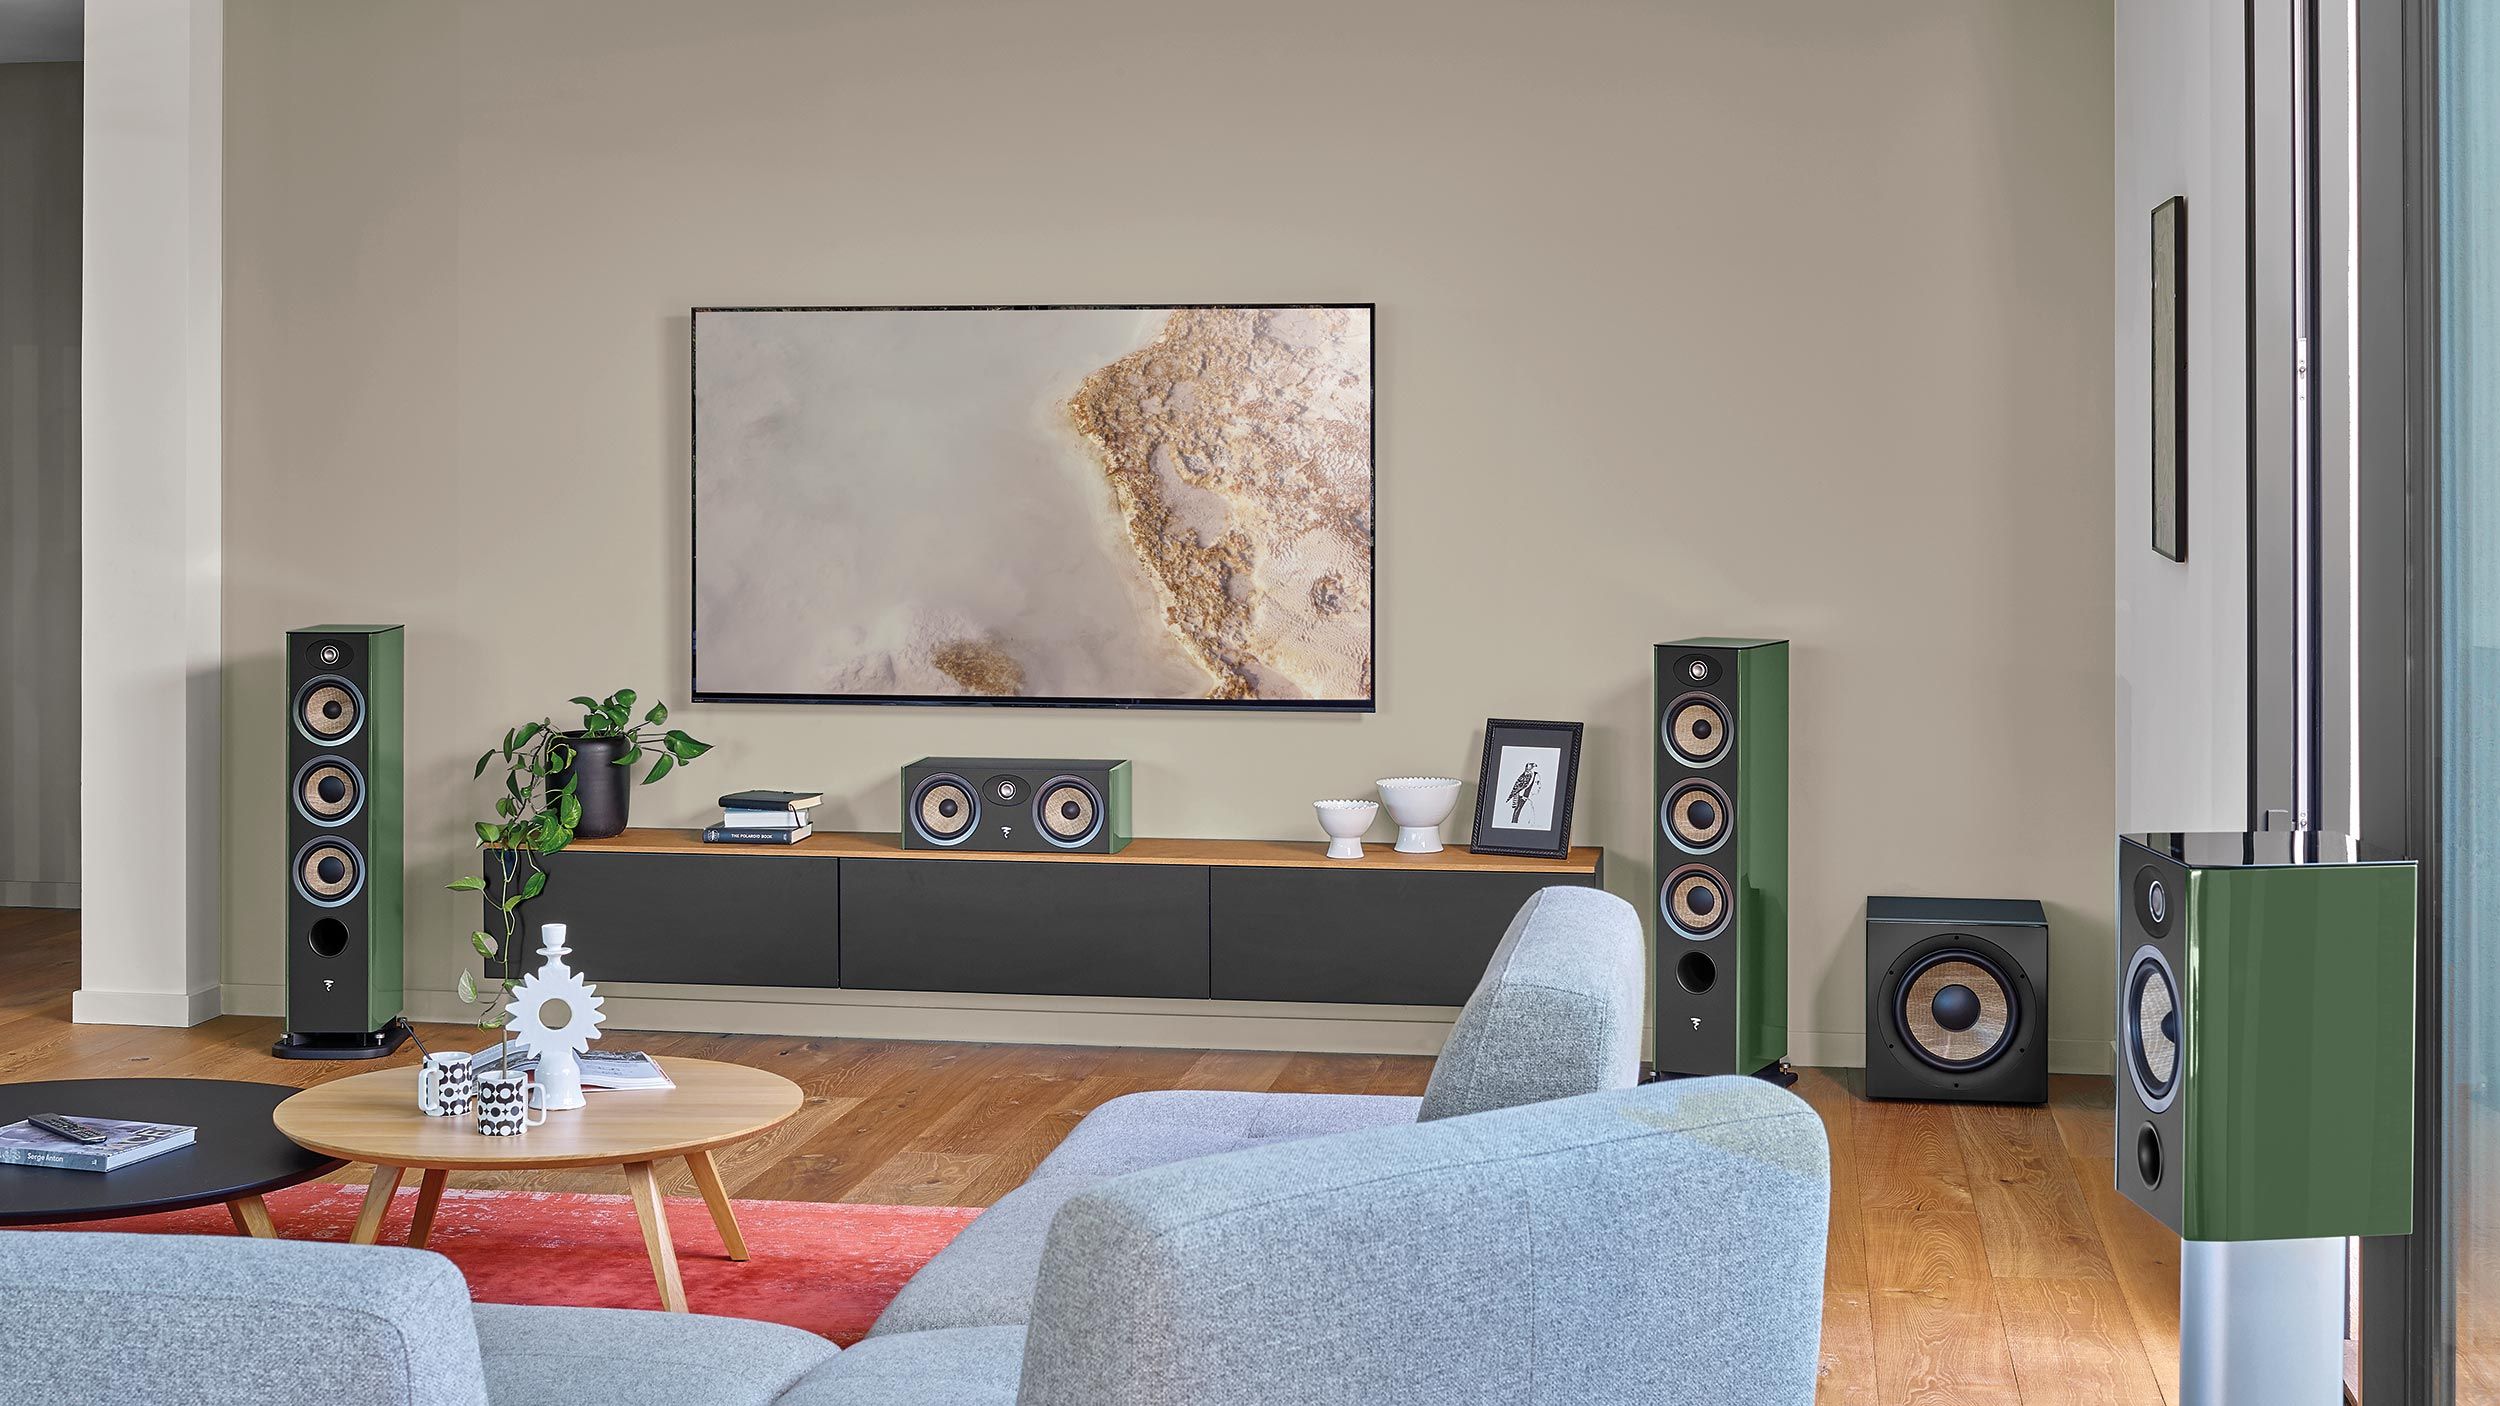 Focal Evo X speakears setup in a modern living room with sleek, green speakers, a large wall-mounted TV, and minimalist decor.